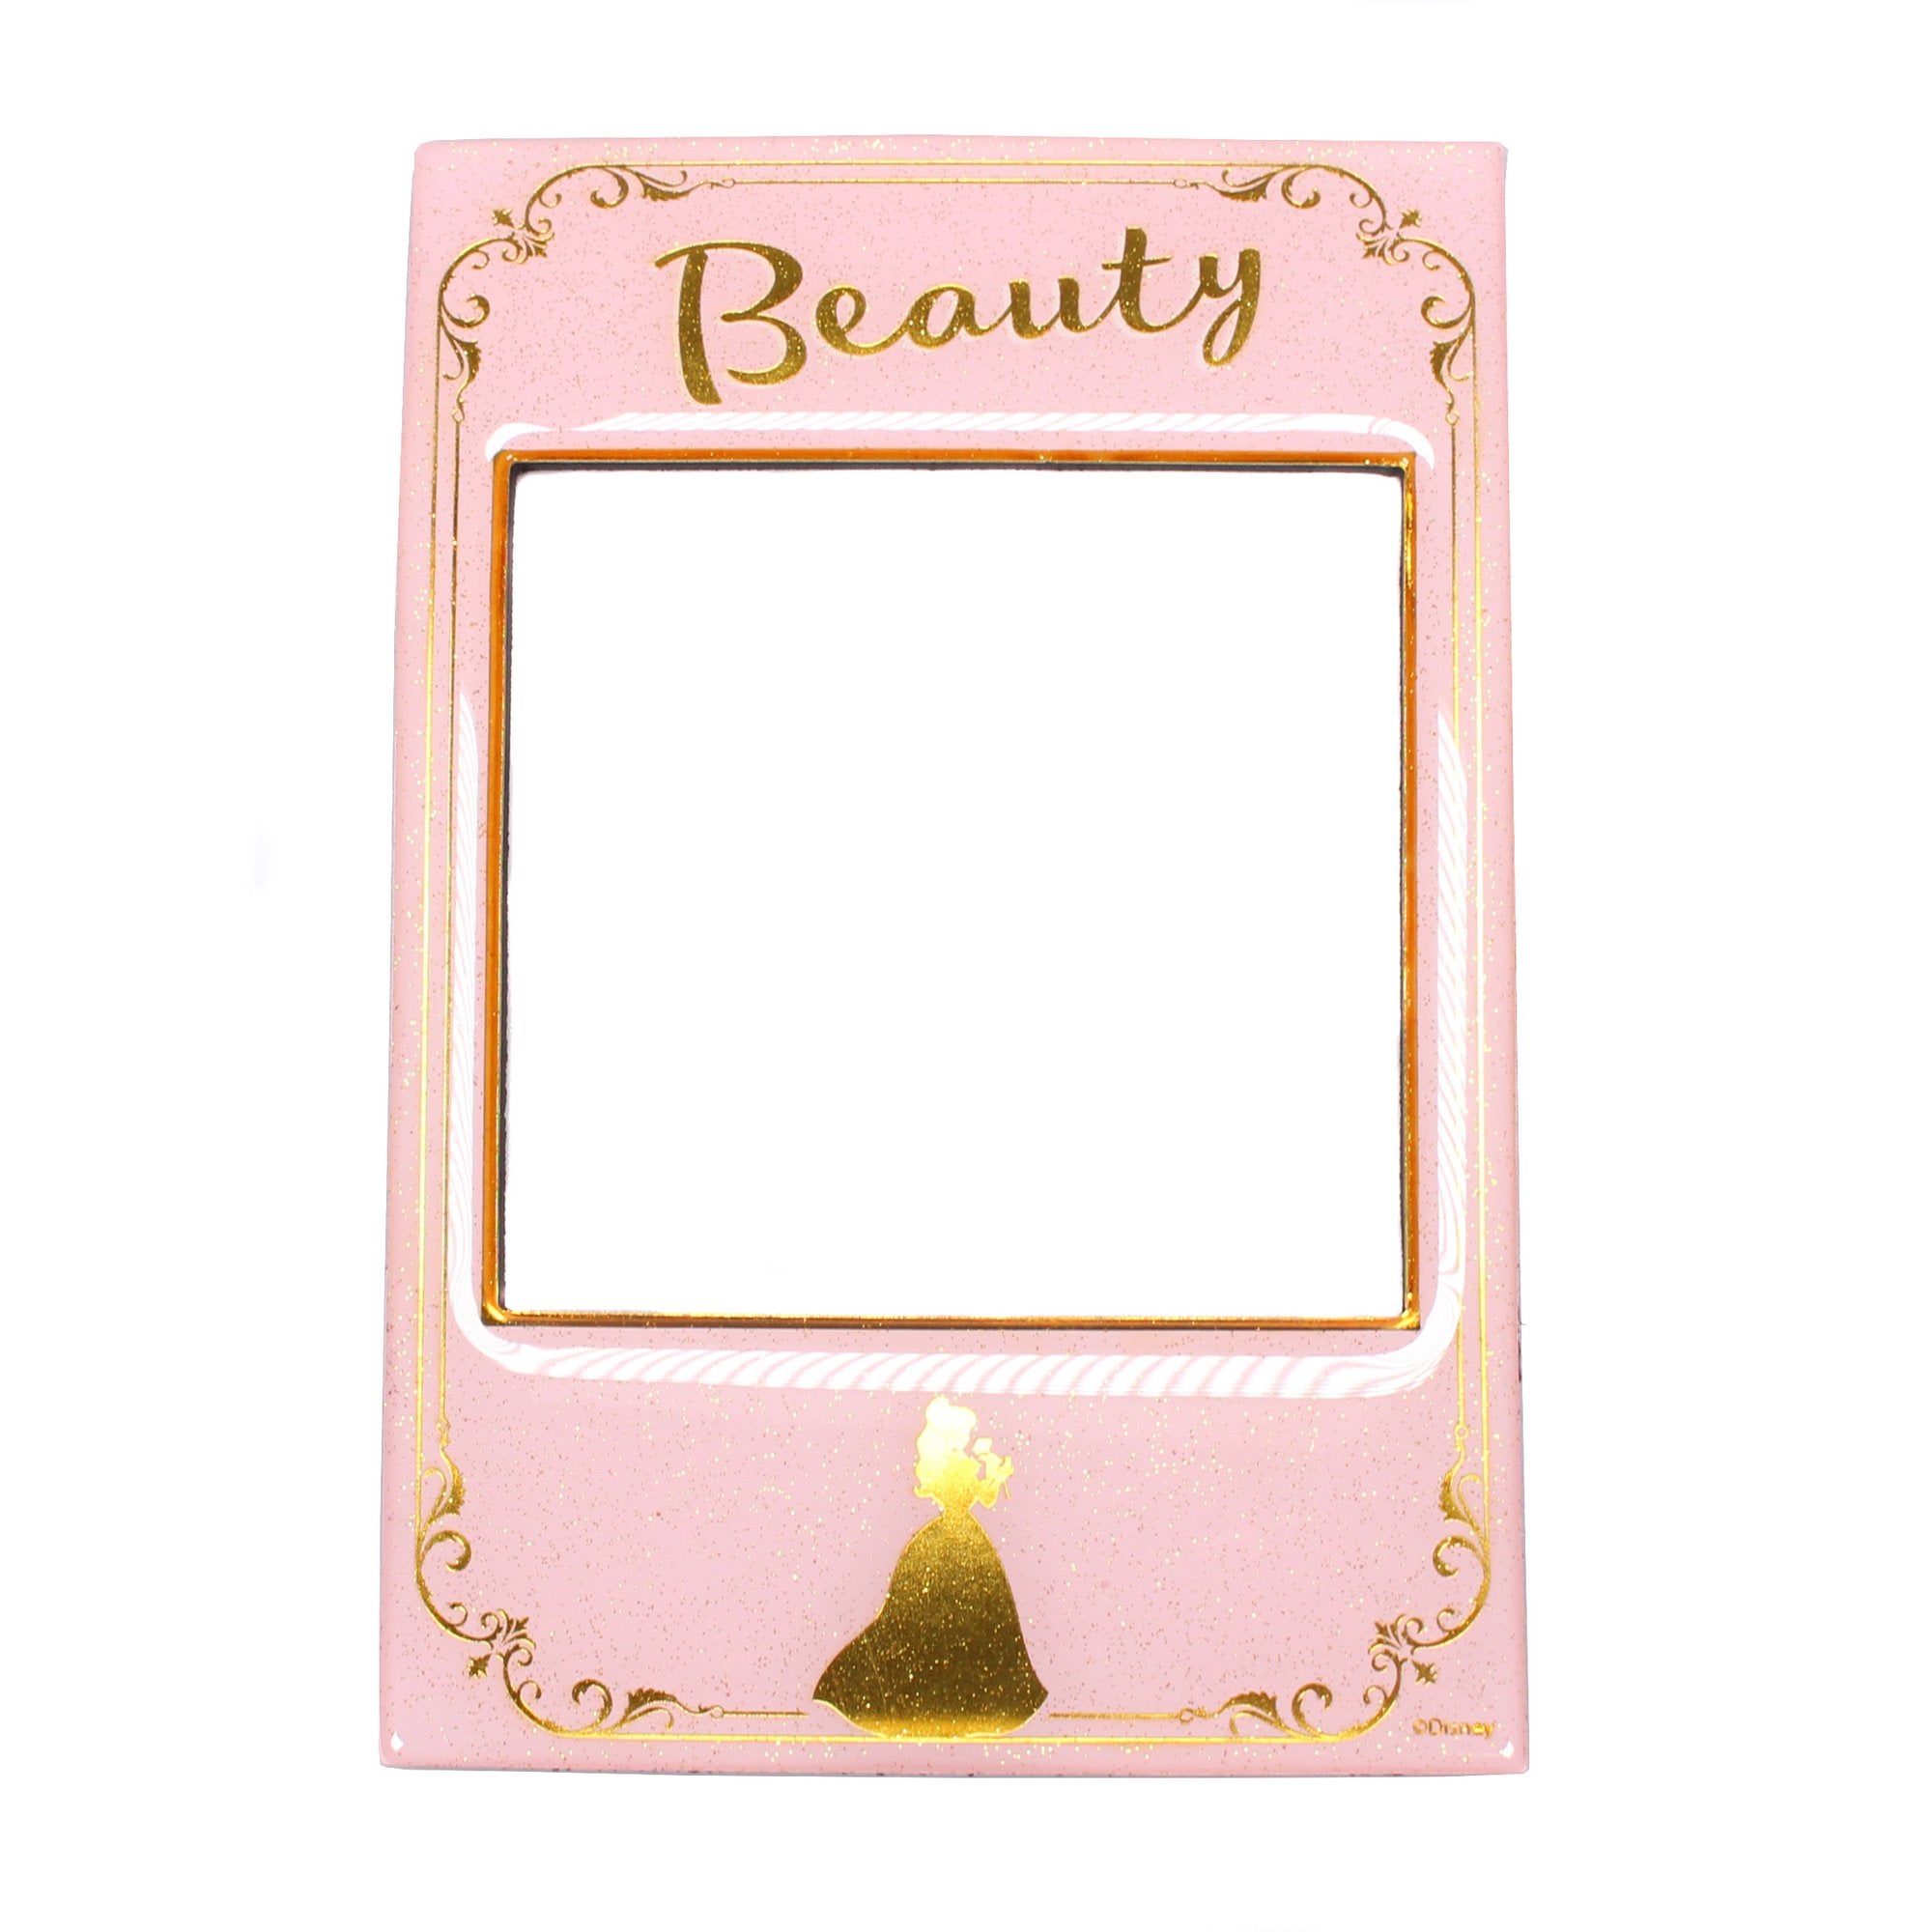 Beauty and the Beast Set of 2 Photo Frame Magnets